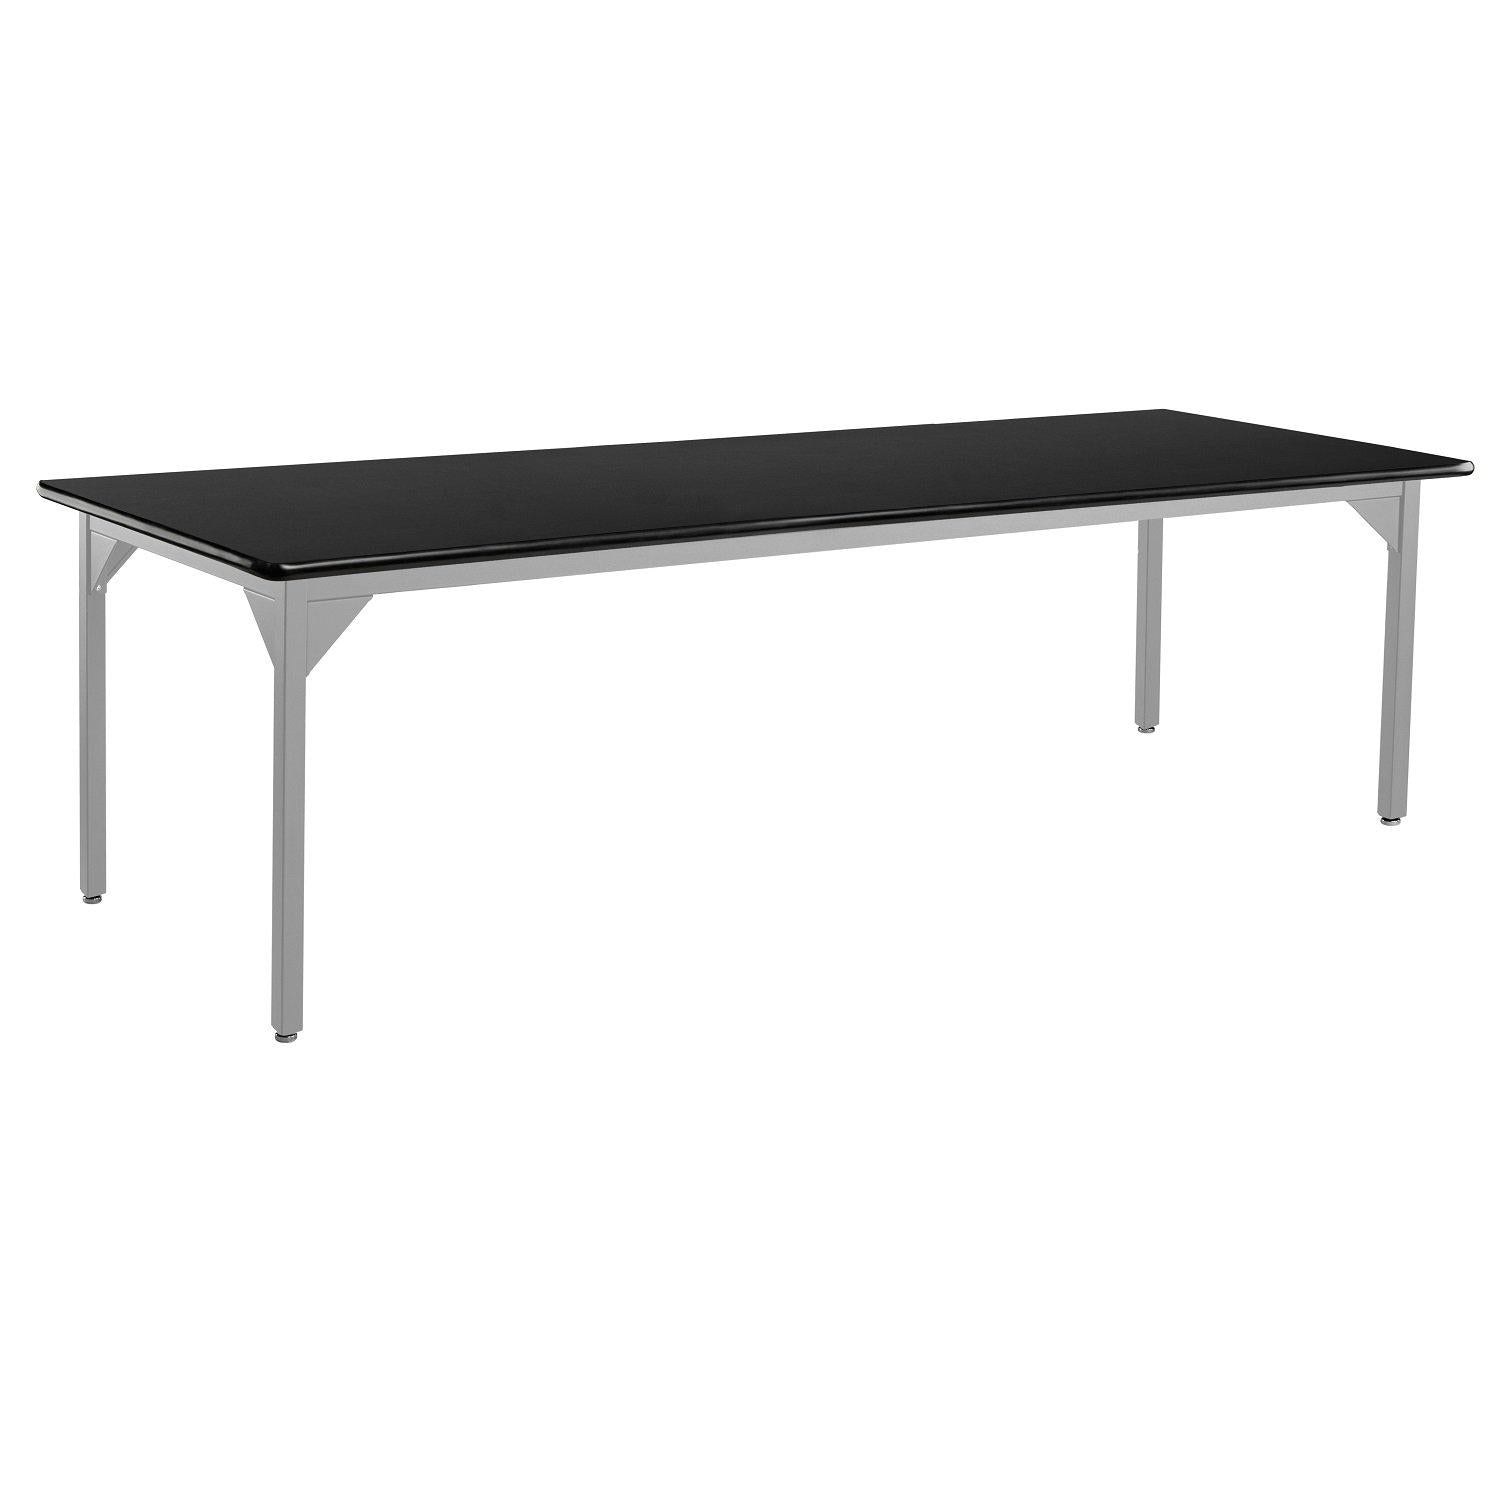 Heavy-Duty Fixed Height Utility Table, Soft Grey Frame, 48" x 72", High-Pressure Laminate Top with T-Mold Edge